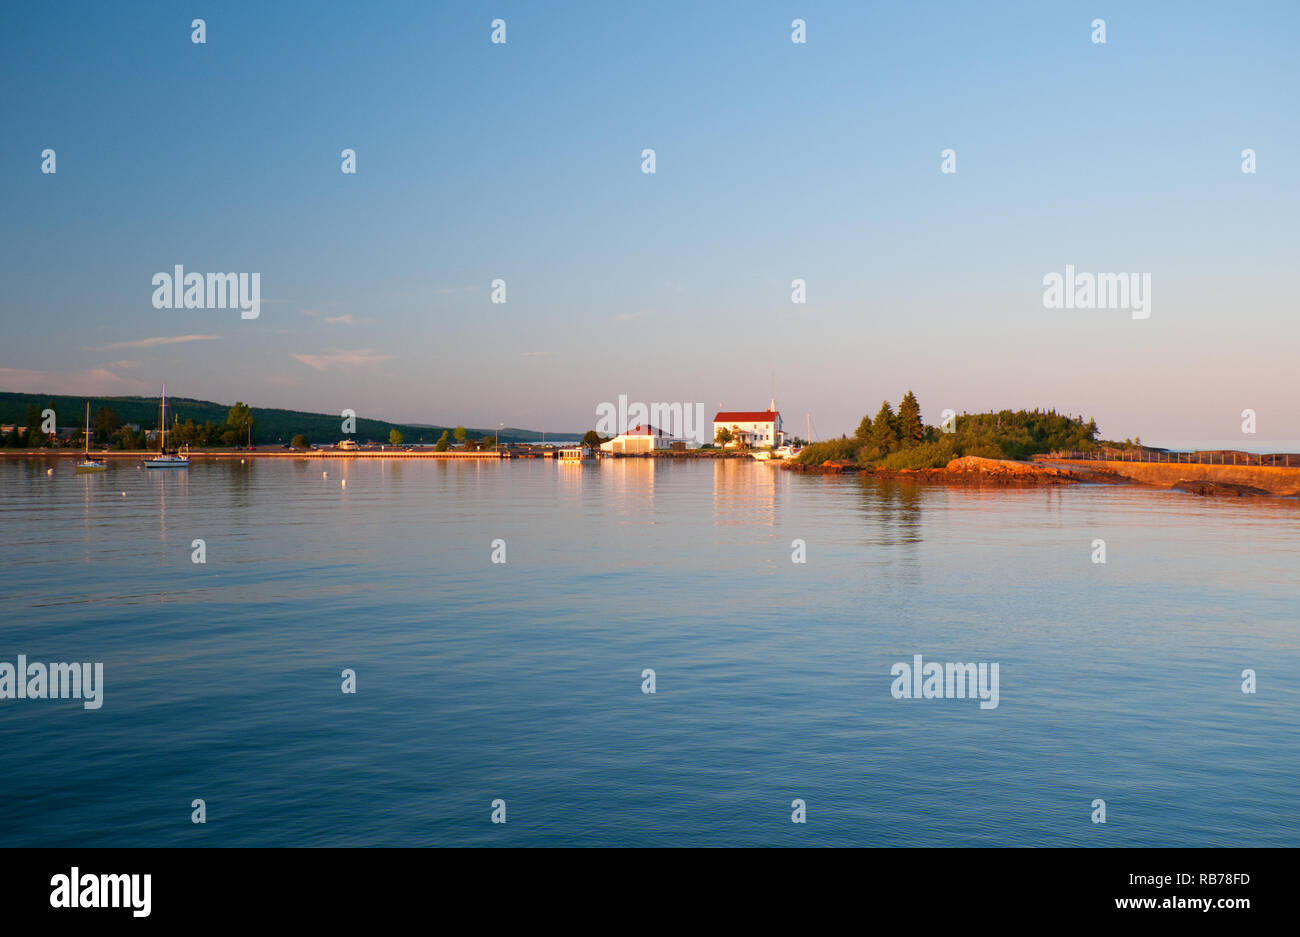 The Harbor of Grand Marias, Minnesota in the Evening Stock Photo